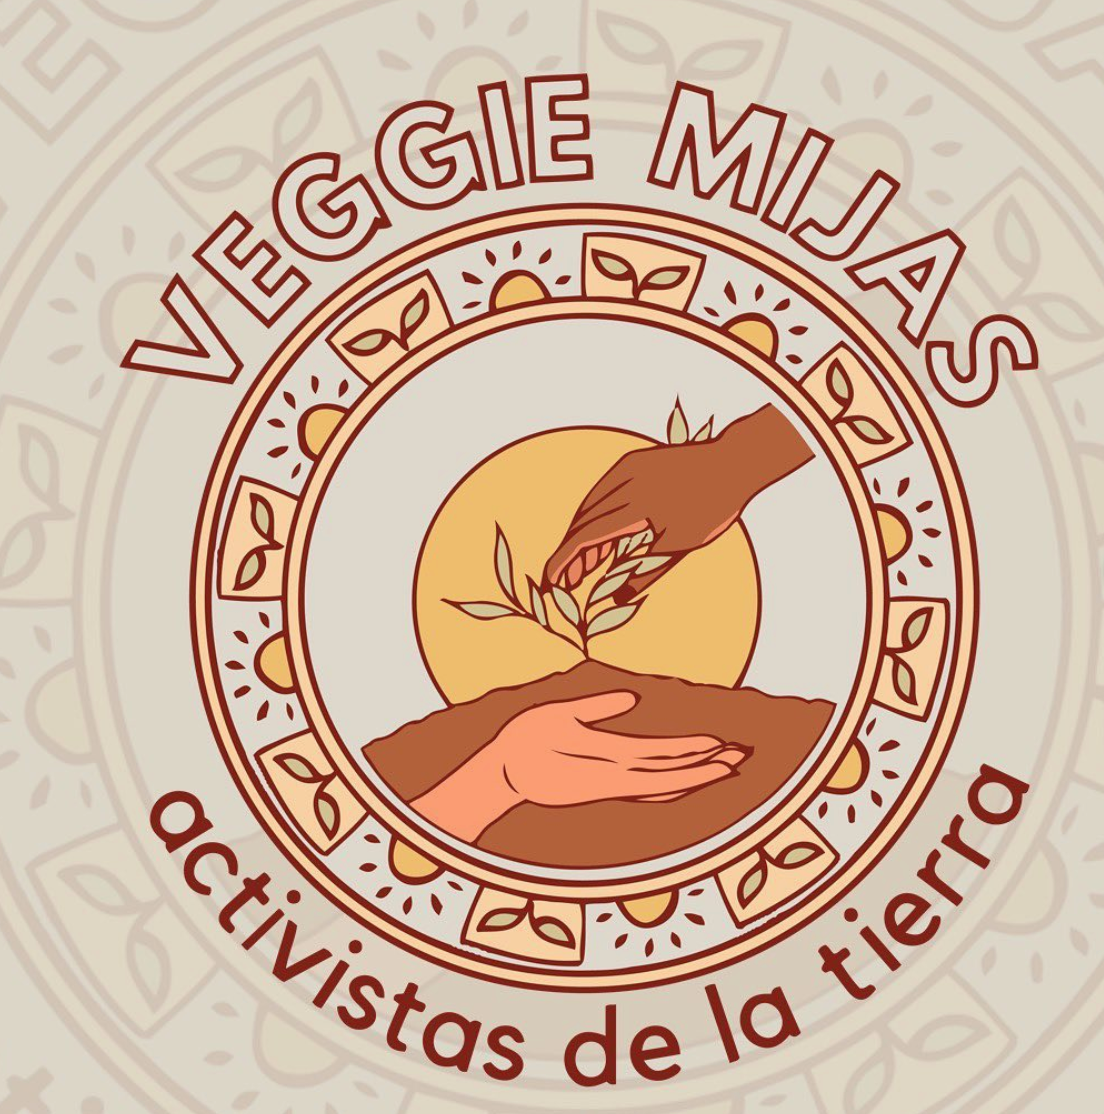 Veggie Mijas logo with hands holding a seedling